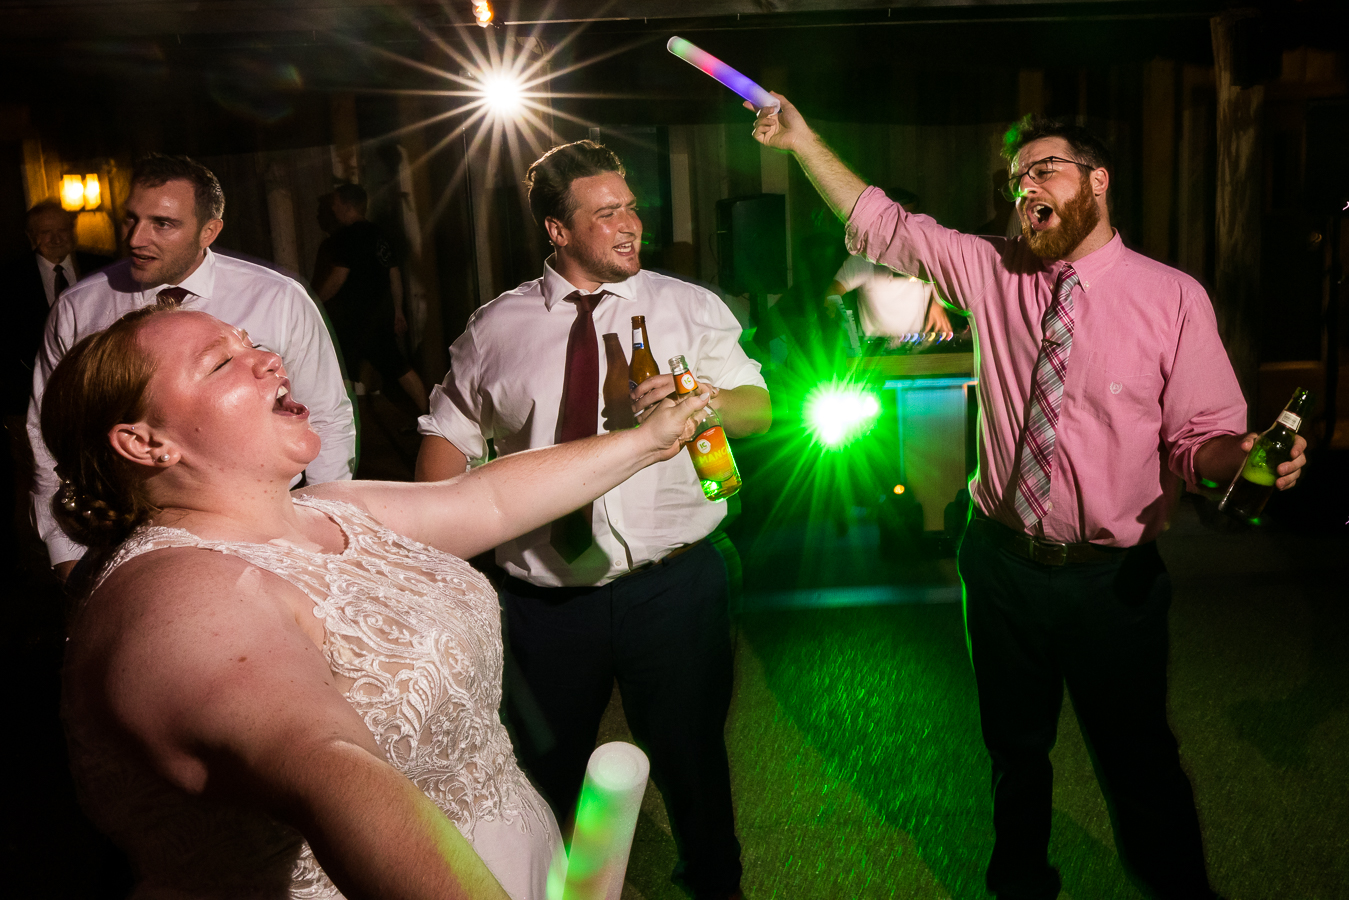 vibrant, colorful, fun image of this outdoor wedding reception as guests sing and dance with the bride and their giant glow sticks